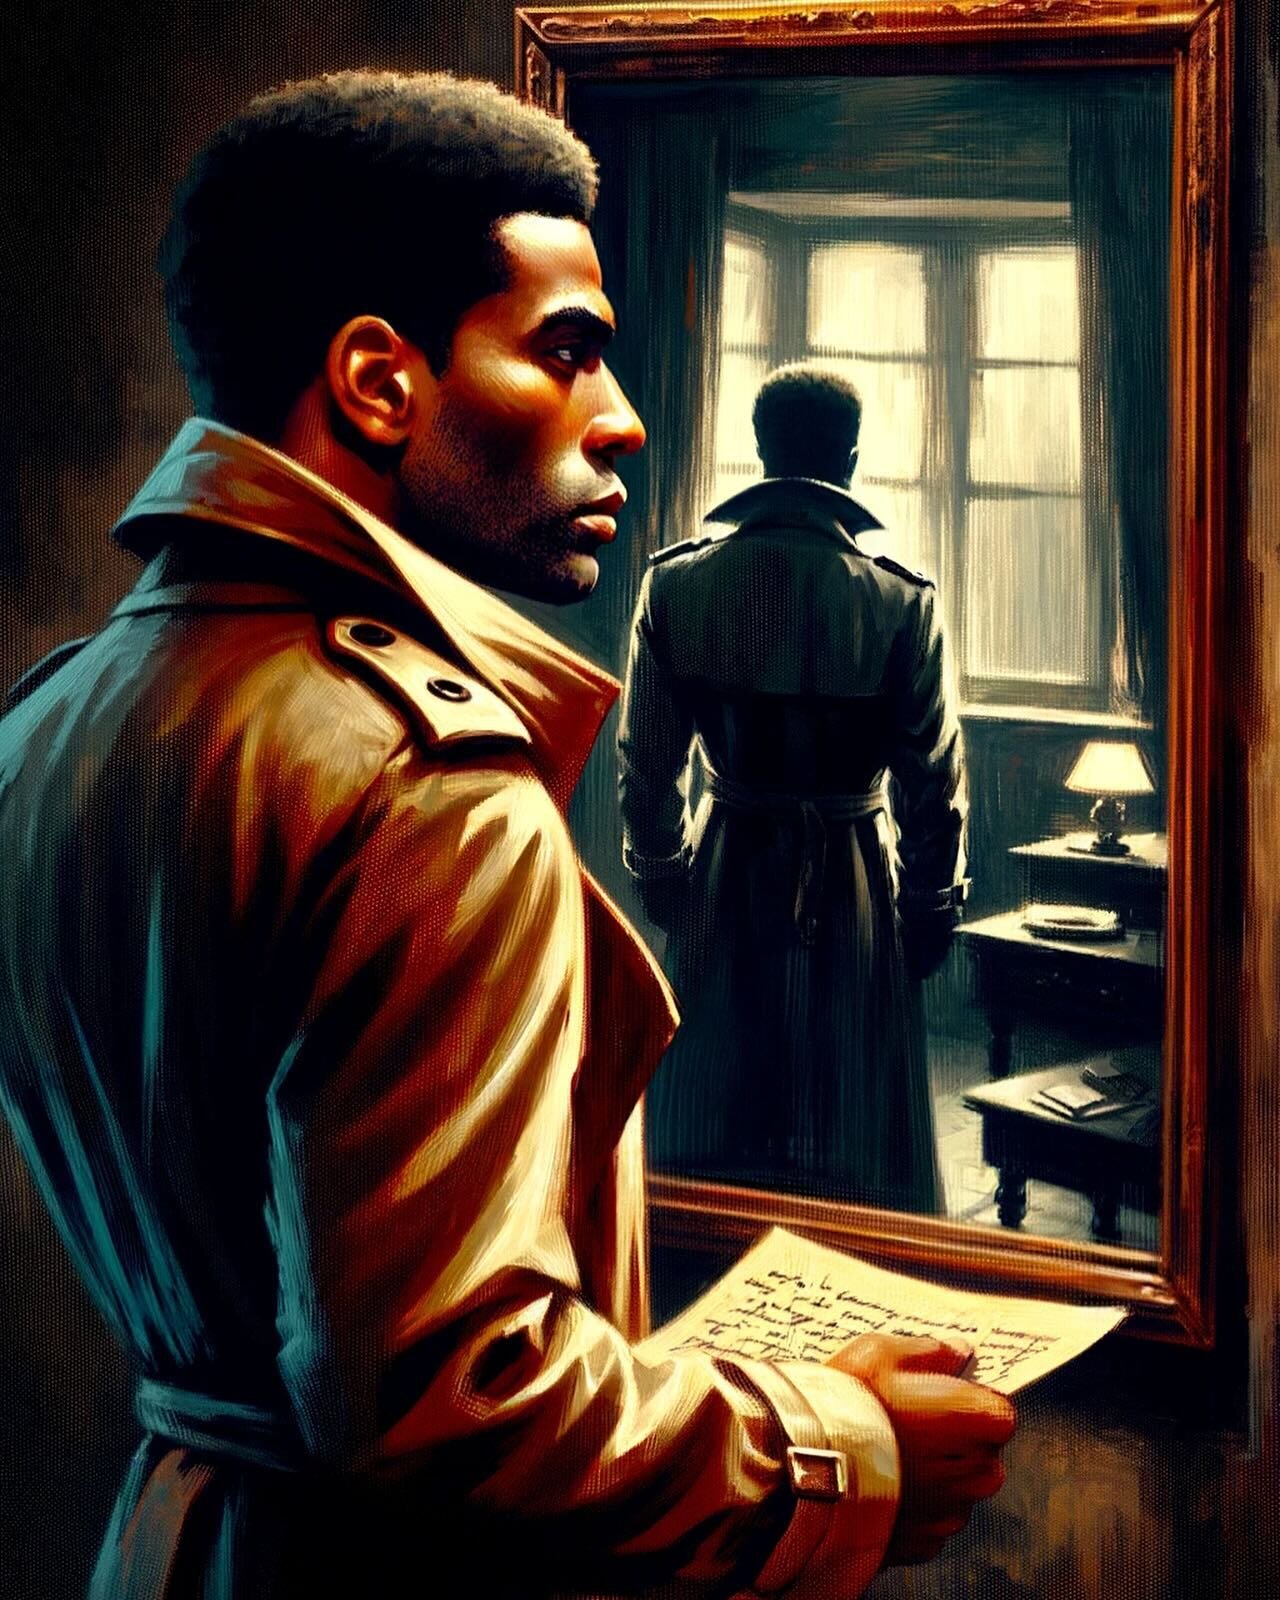 The antique store was largely filled with crap.

But there was a mirror. Hulking, unadorned, old.

In it, his reflection moved without him. 

The fallacious double reached through the glass with a note.

&ldquo;He&rsquo;s waiting...&rdquo; it began.